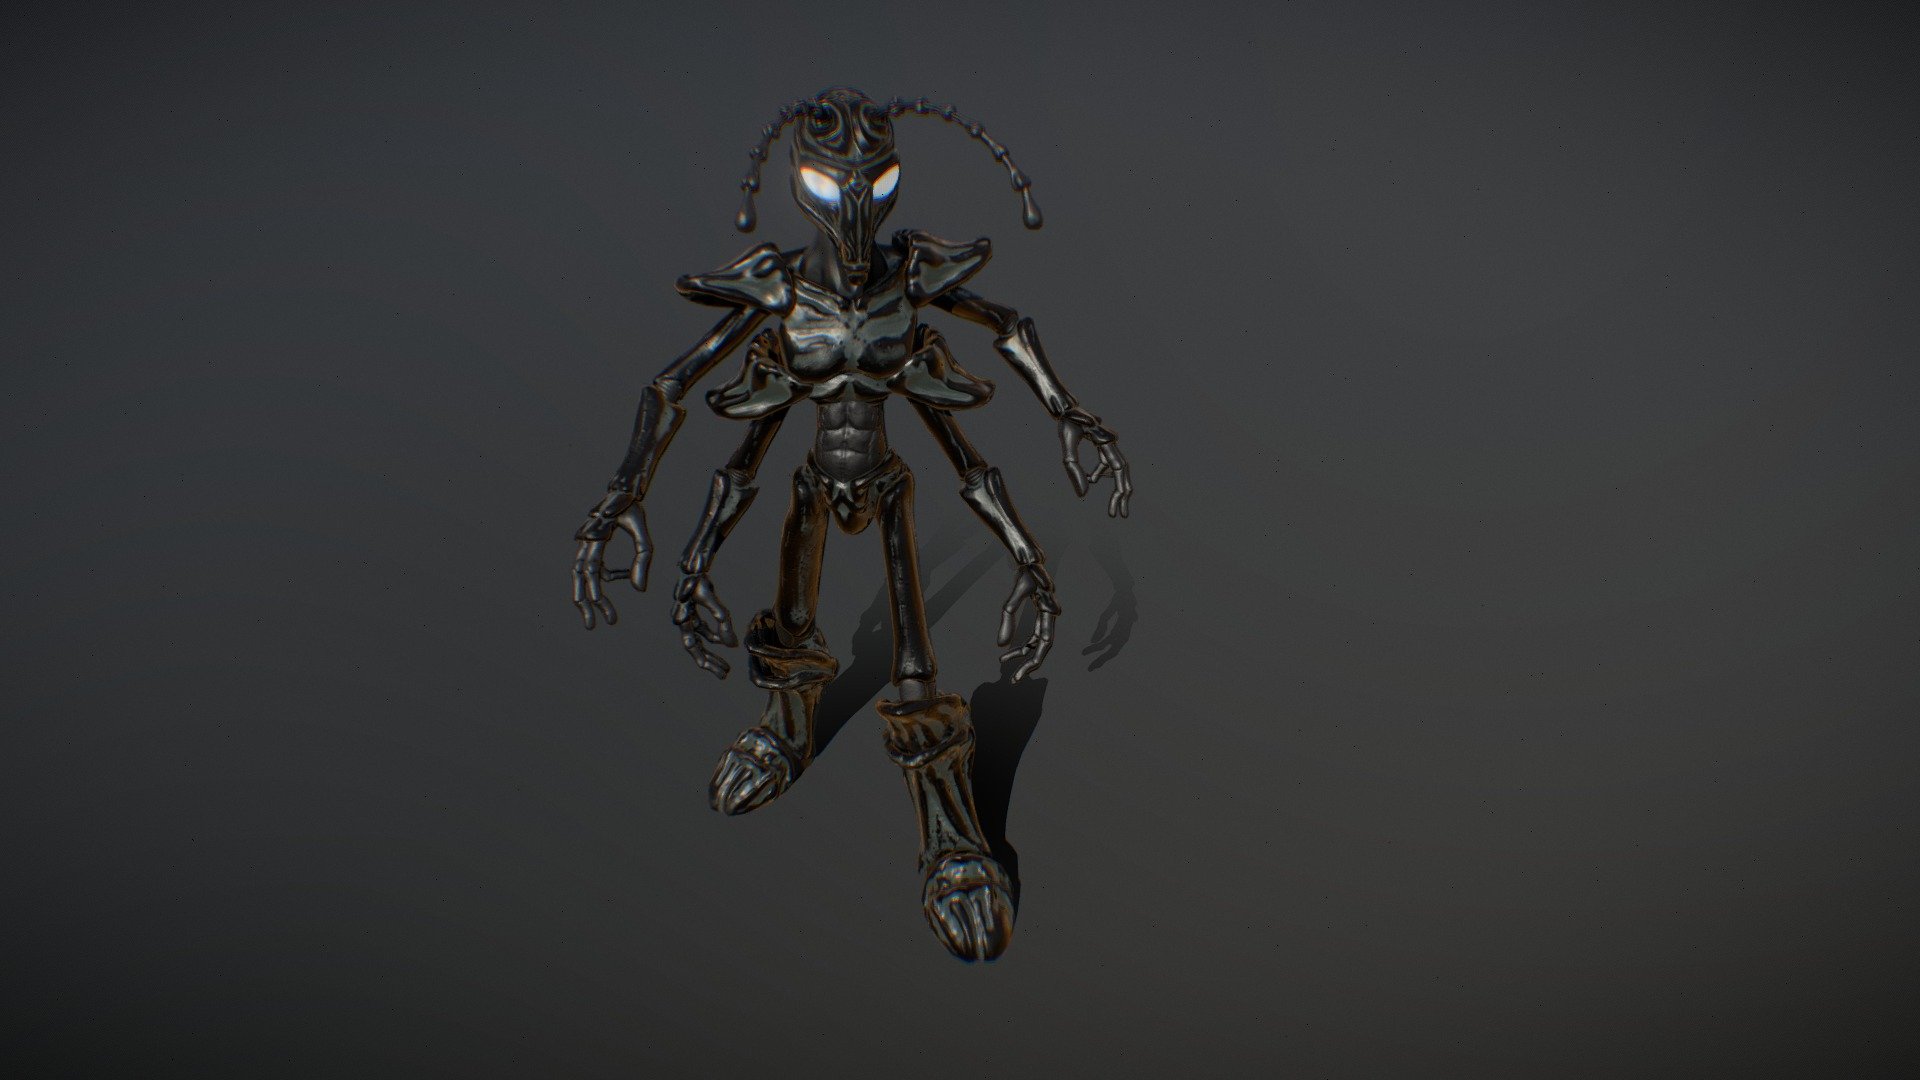 Mascotte from Blackant Master Studio. Inspirer Head using IA Night Cafe  generation 3d model